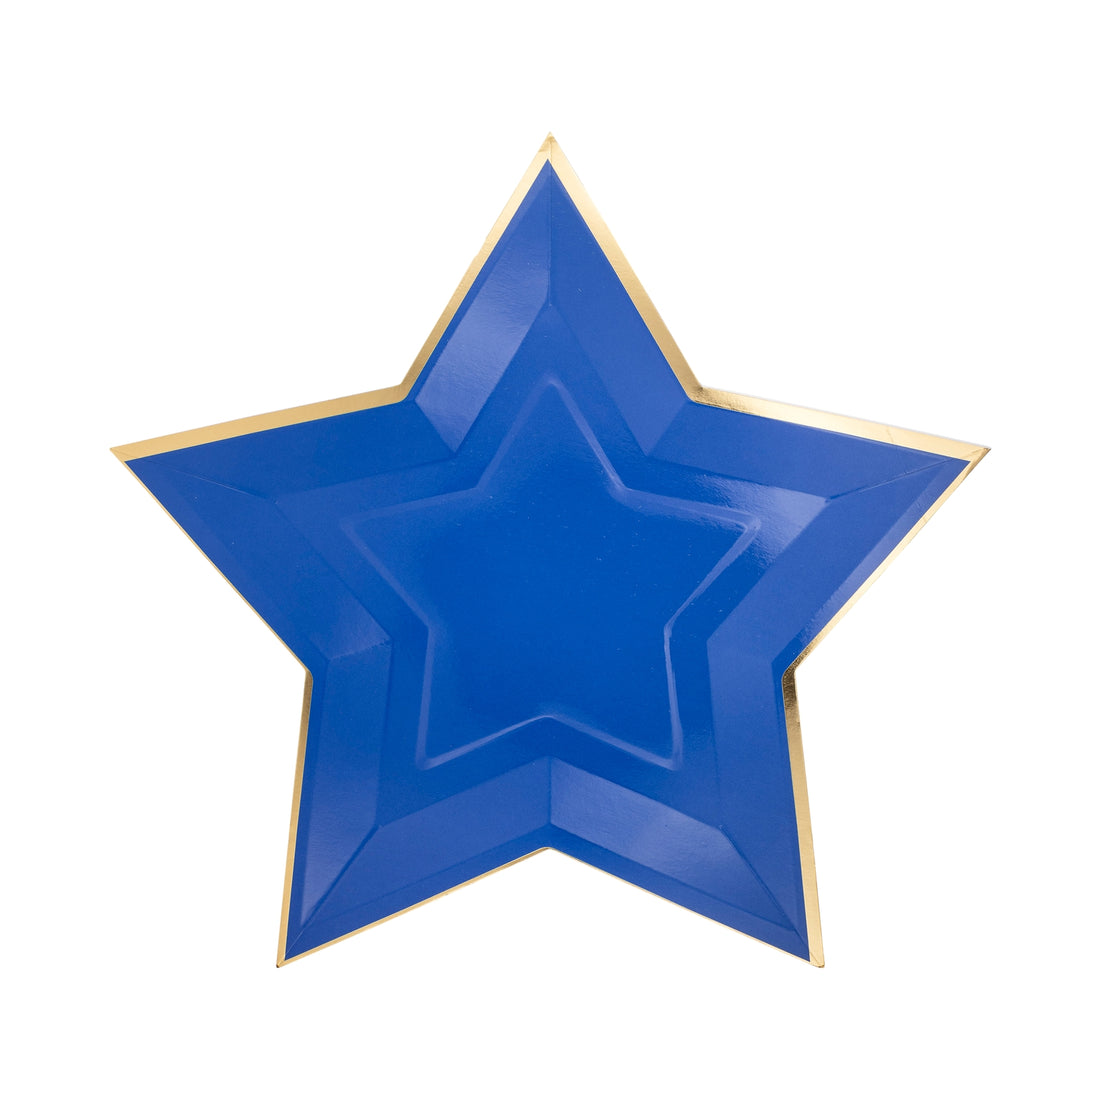 Blue star shaped paper plate with gold foil rim on a white background.